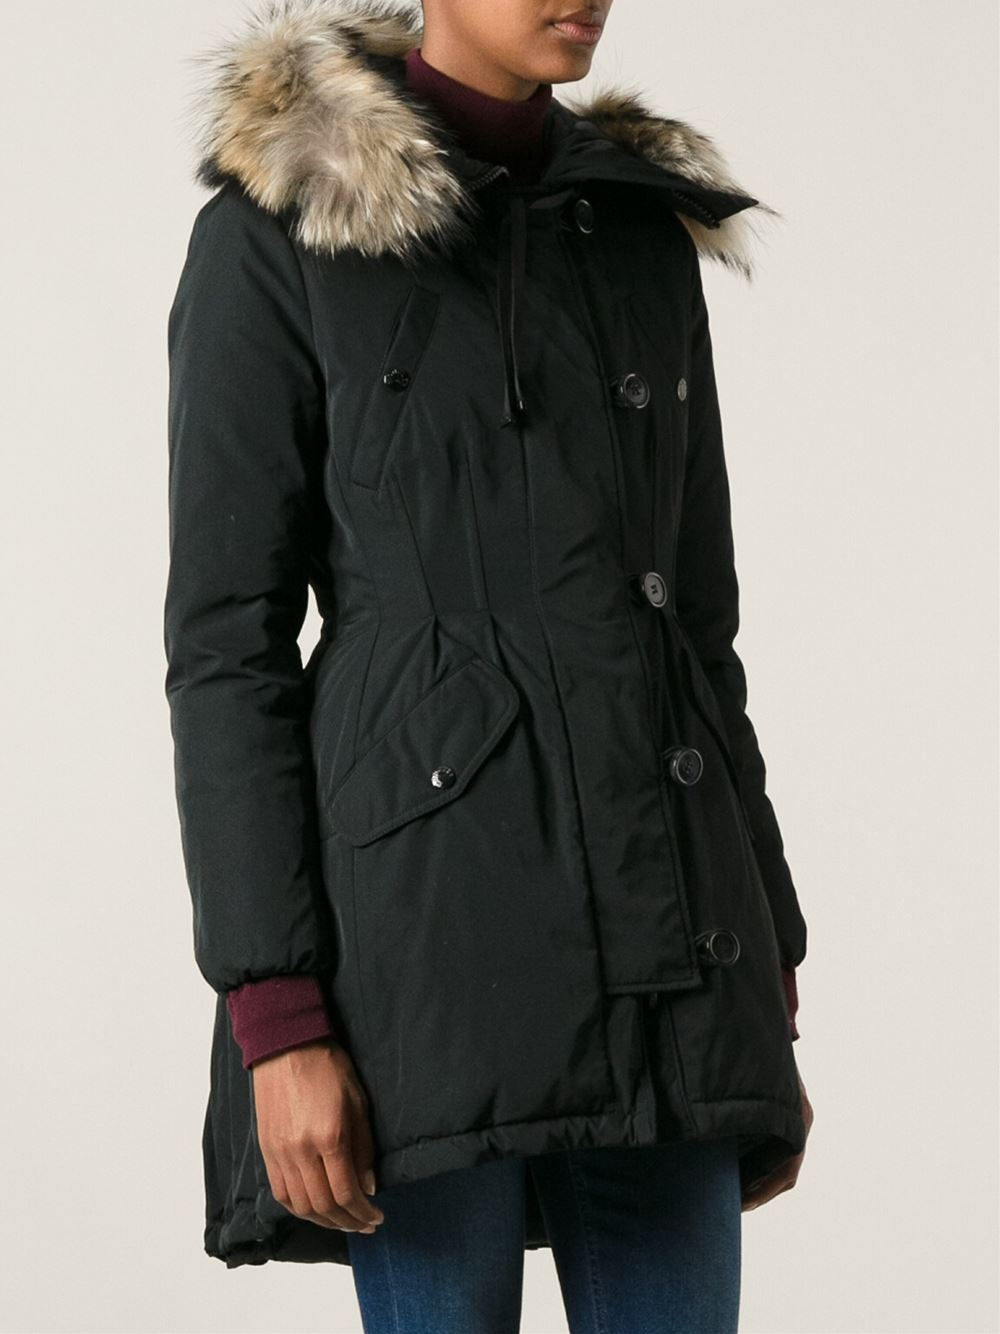 Lyst - Moncler Arrious Padded Parka in Black